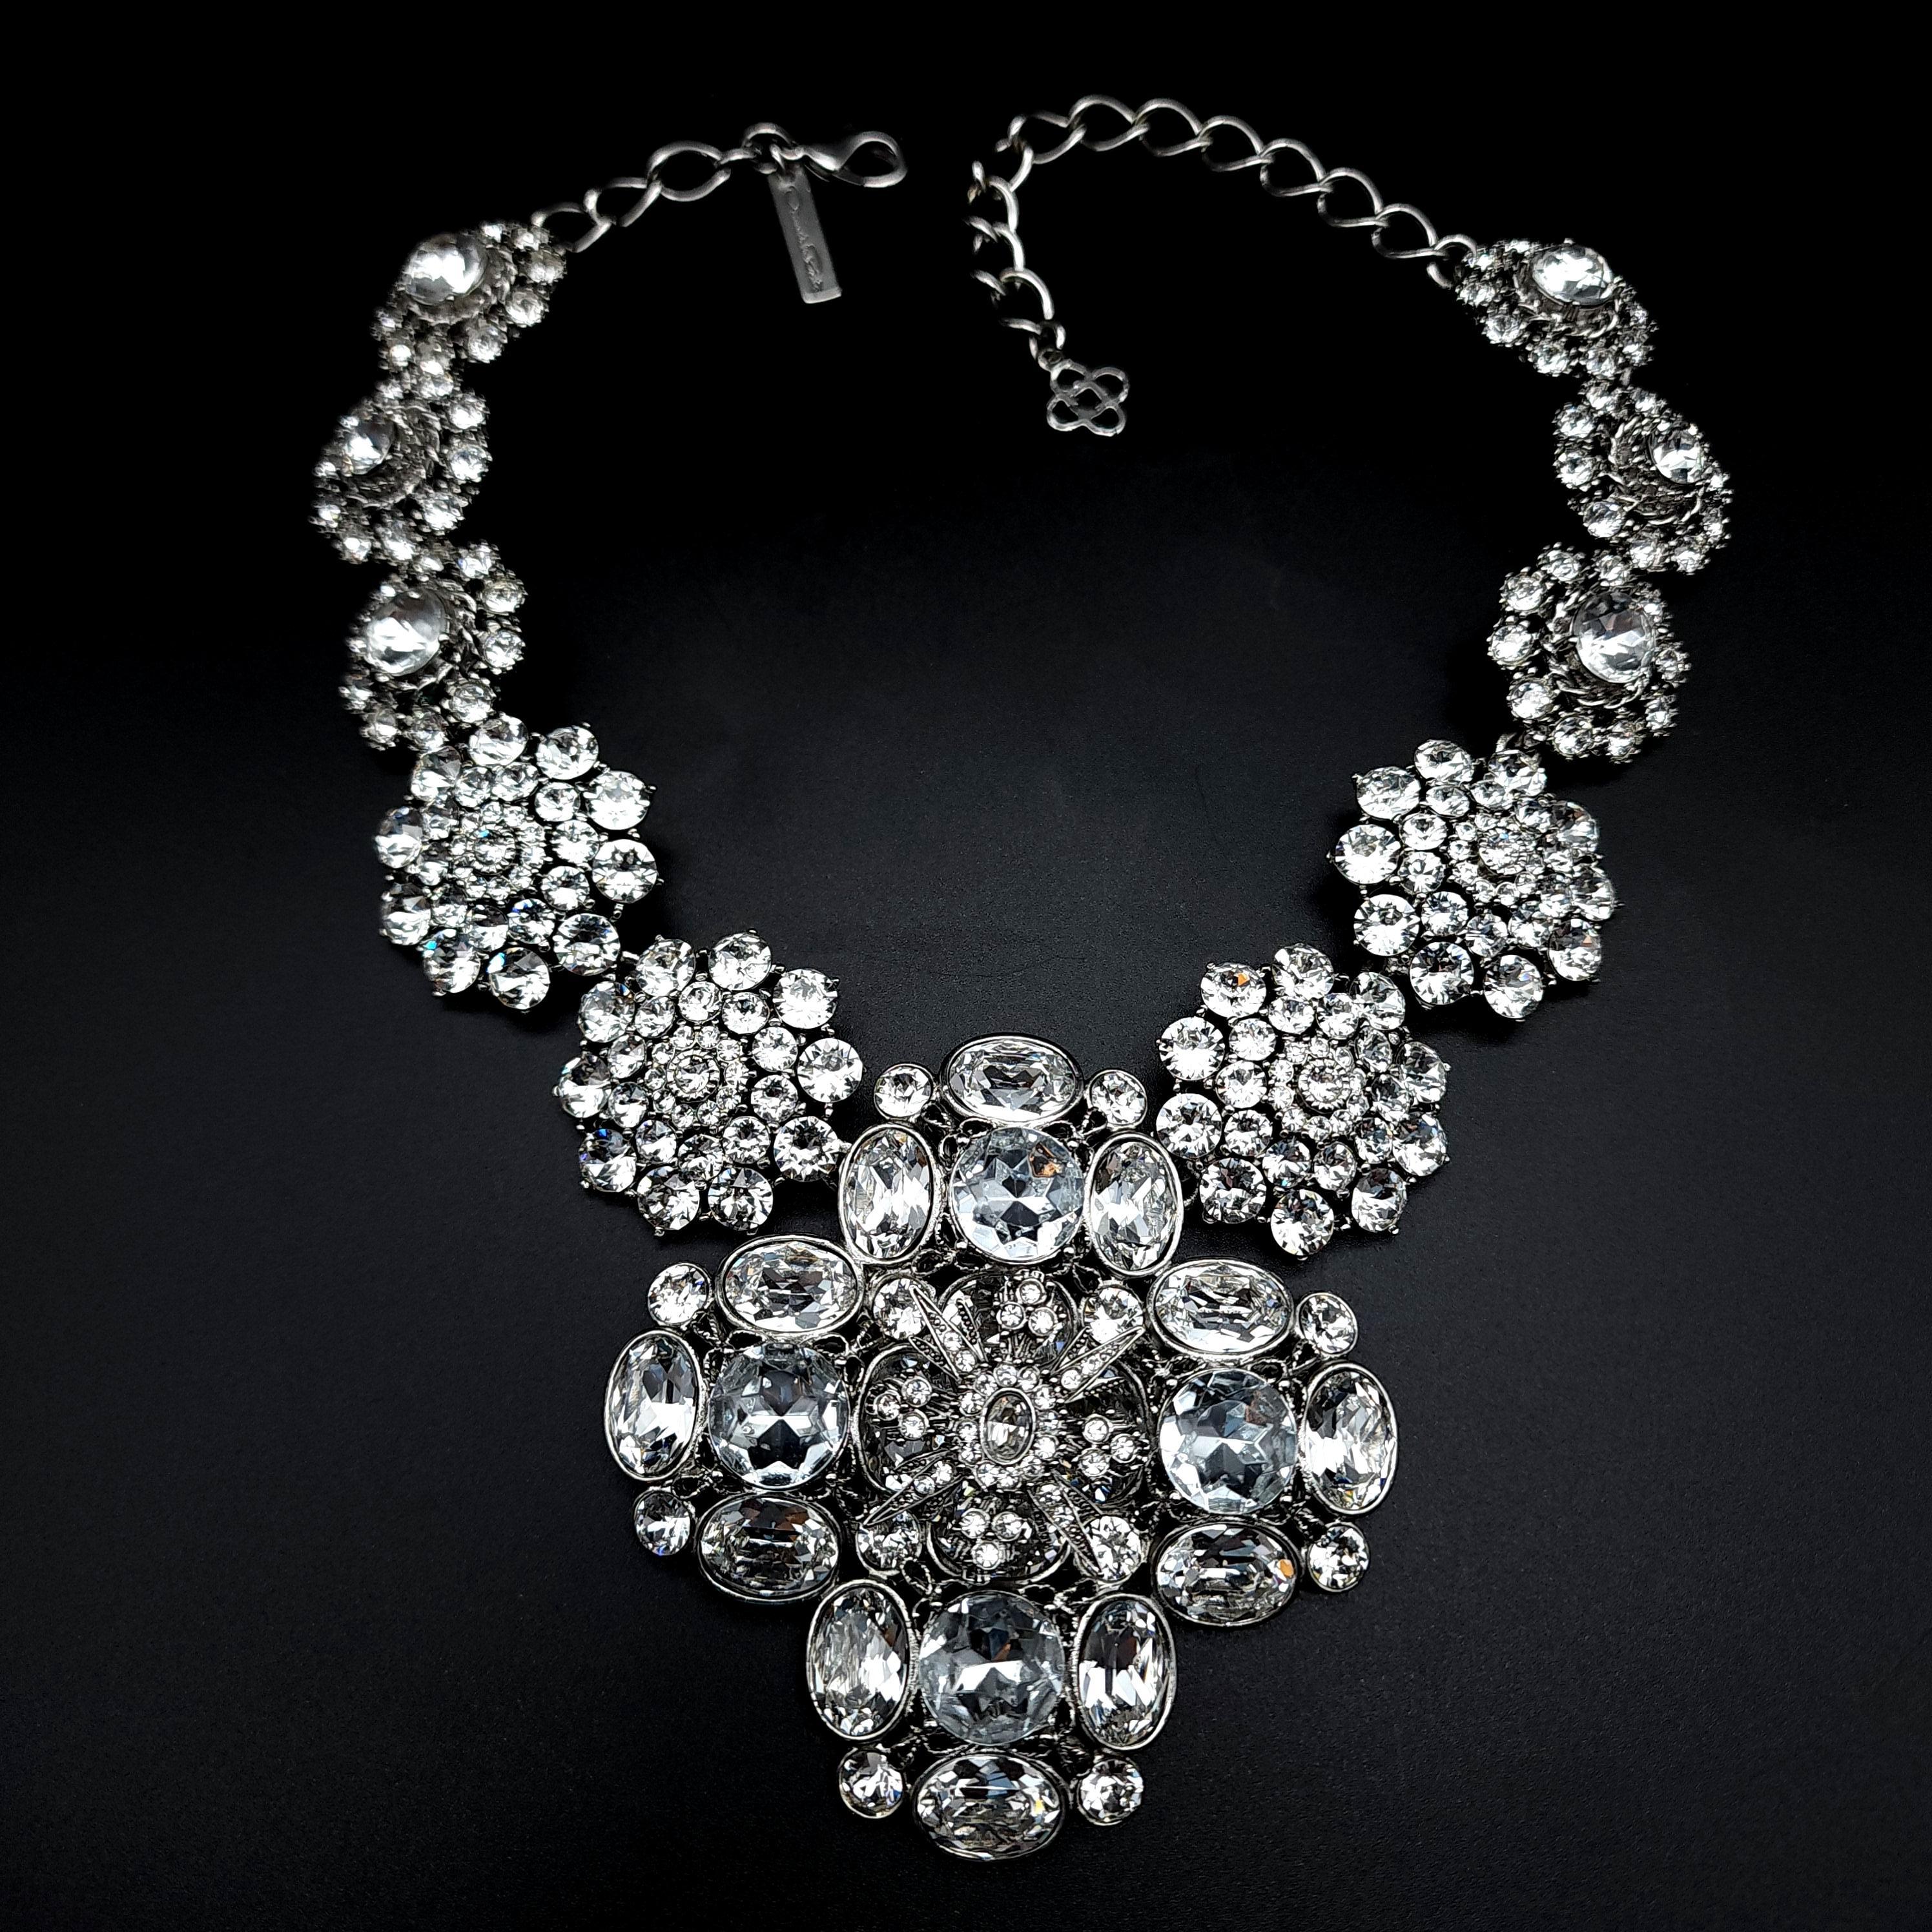 A bold oversized jeweled necklace by Oscar de la Renta. Silver metal and faceted 